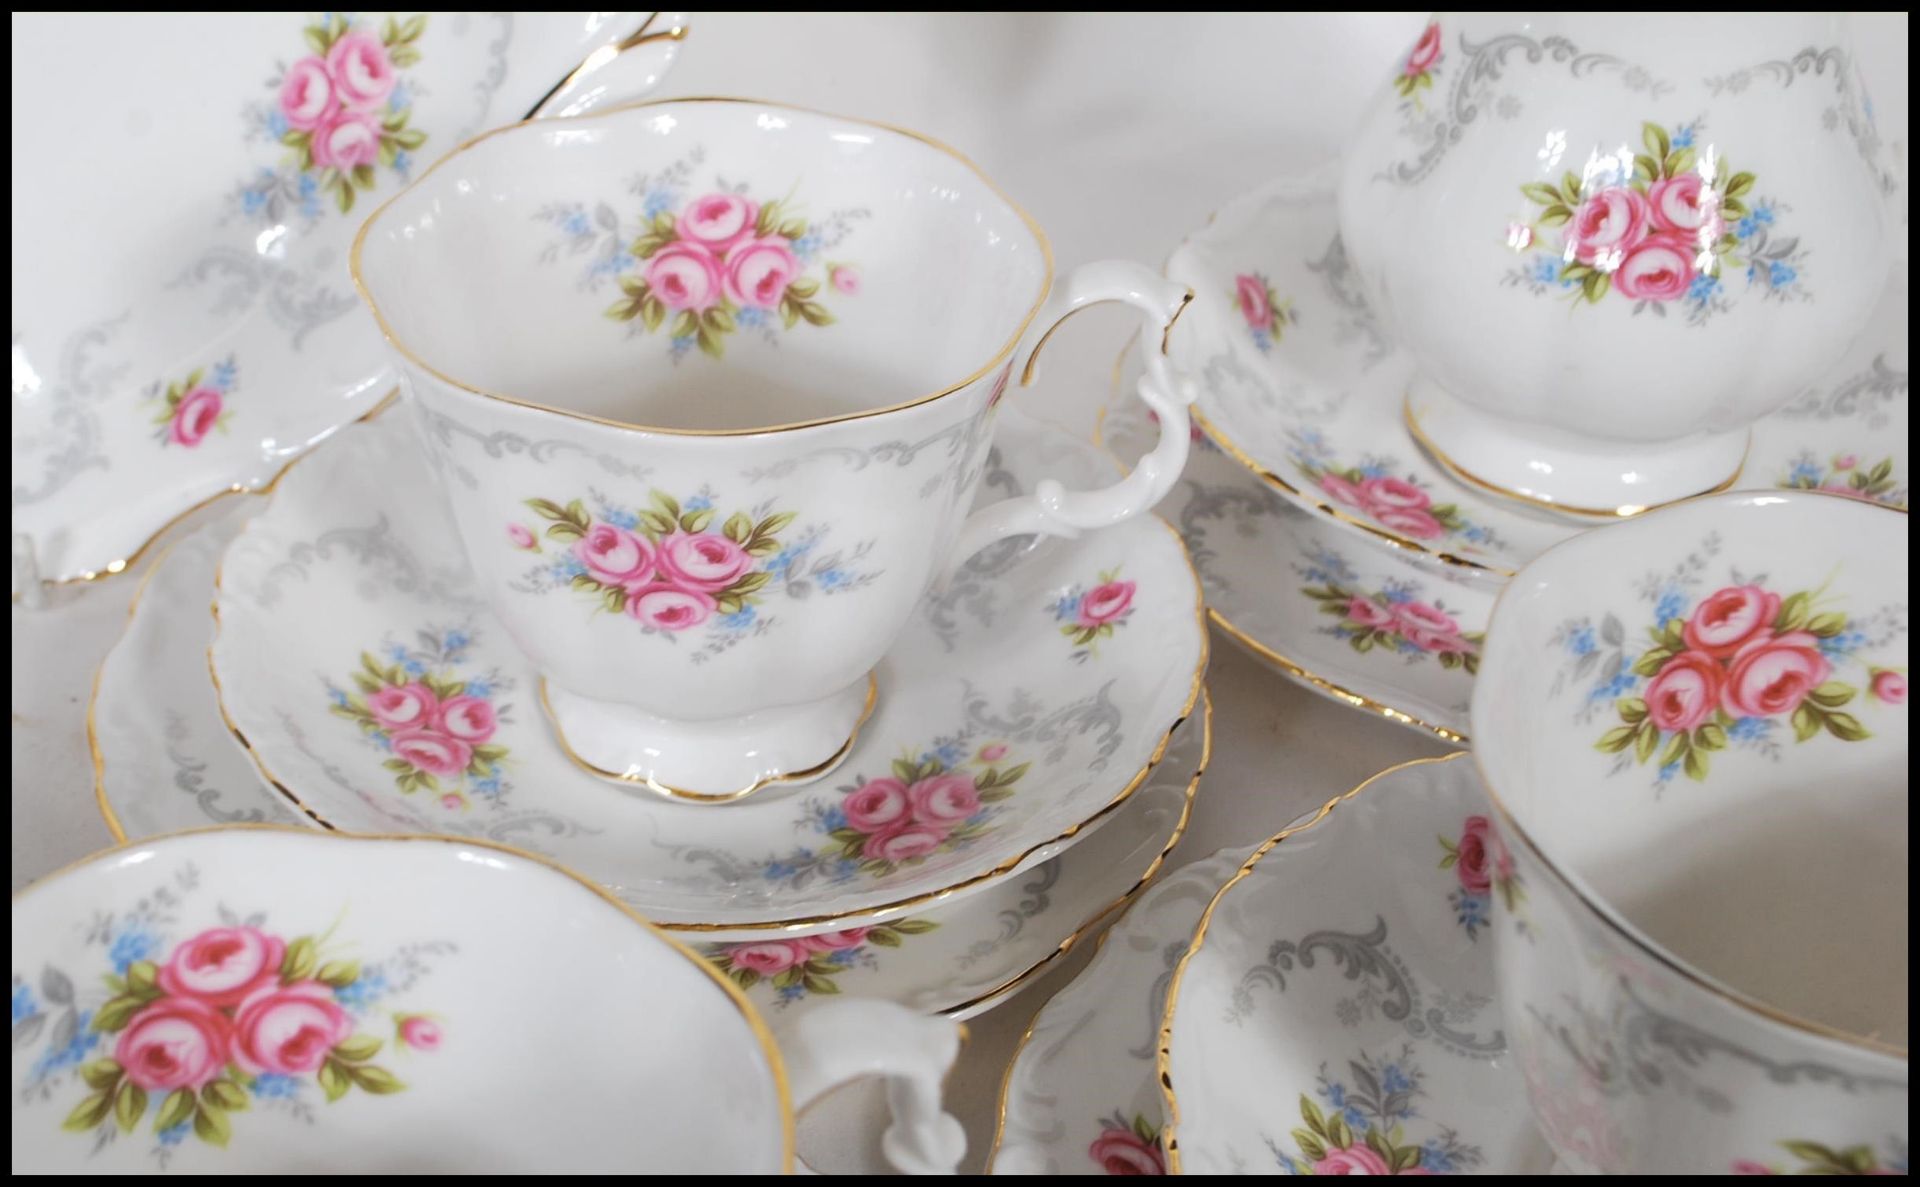 A Royal Albert tea service in the Tranquillity pattern having floral and gray foliate decoration - Image 5 of 8